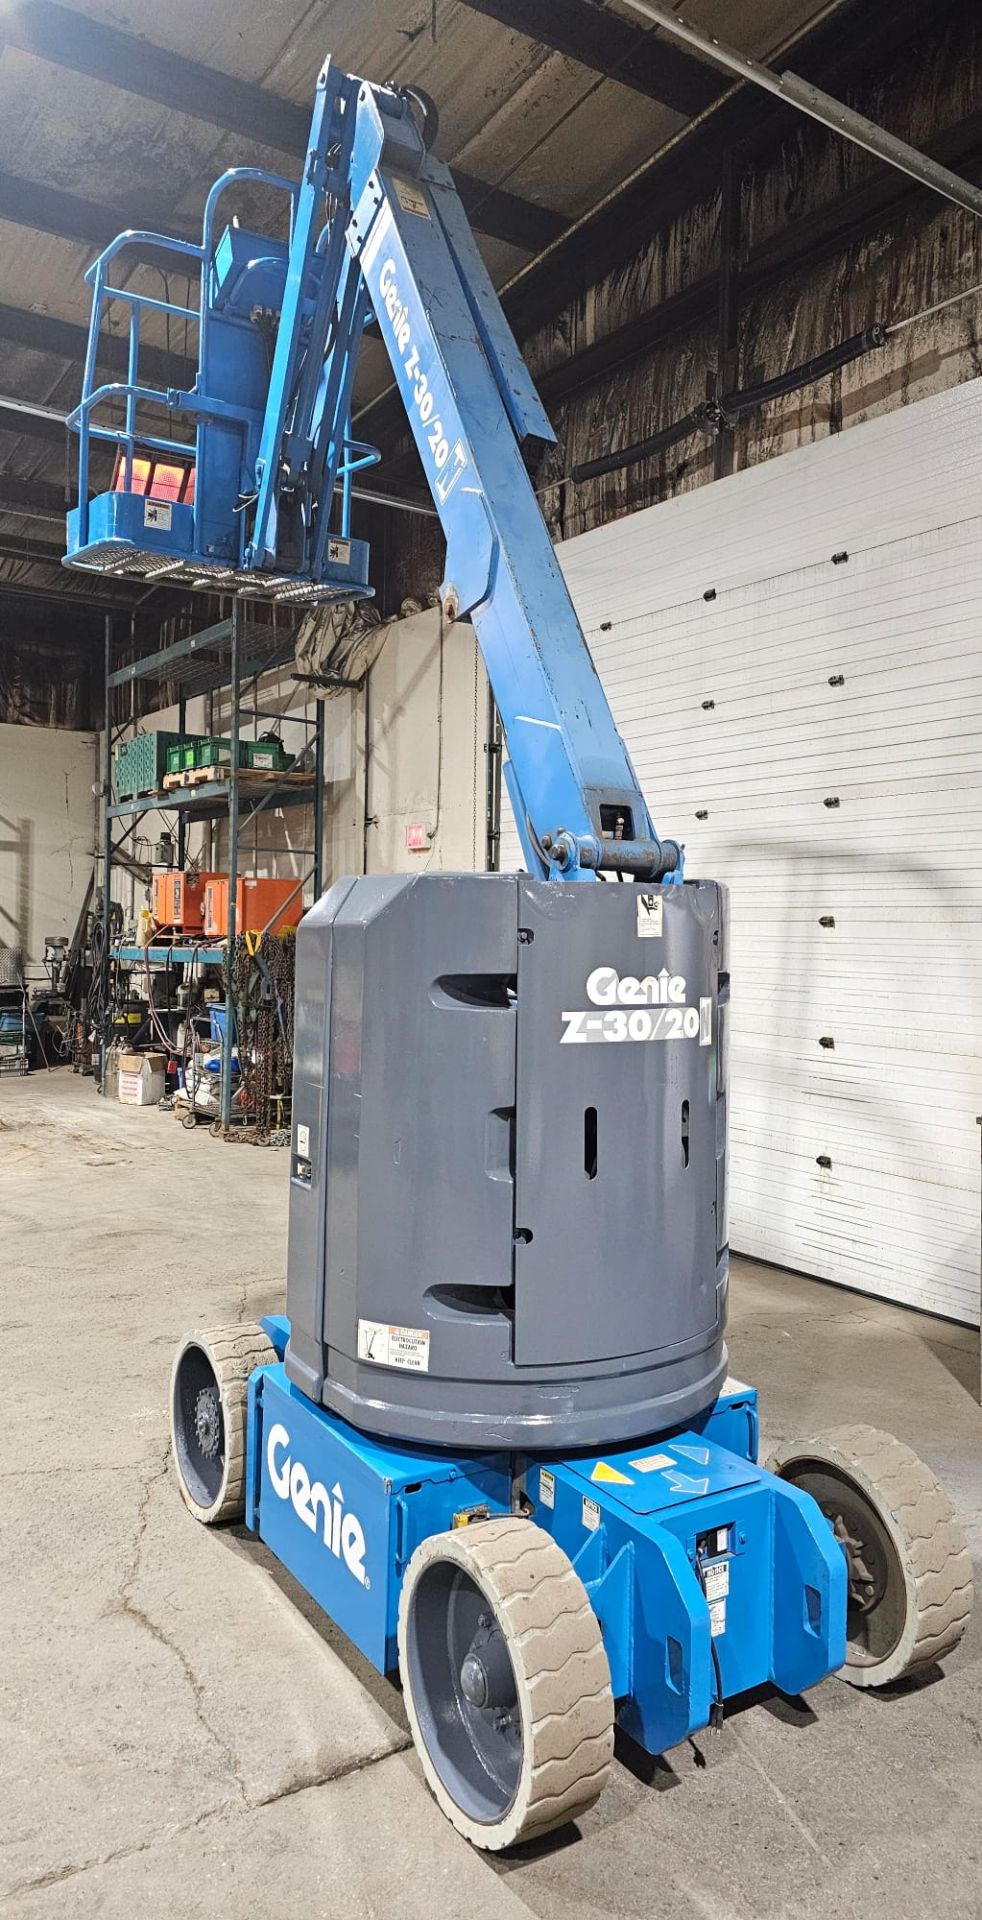 Genie model Z-30-N Zoom Boom Electric Motorized Man Lift 30' Height & 21' Reach - with 24V Battery - Image 7 of 10